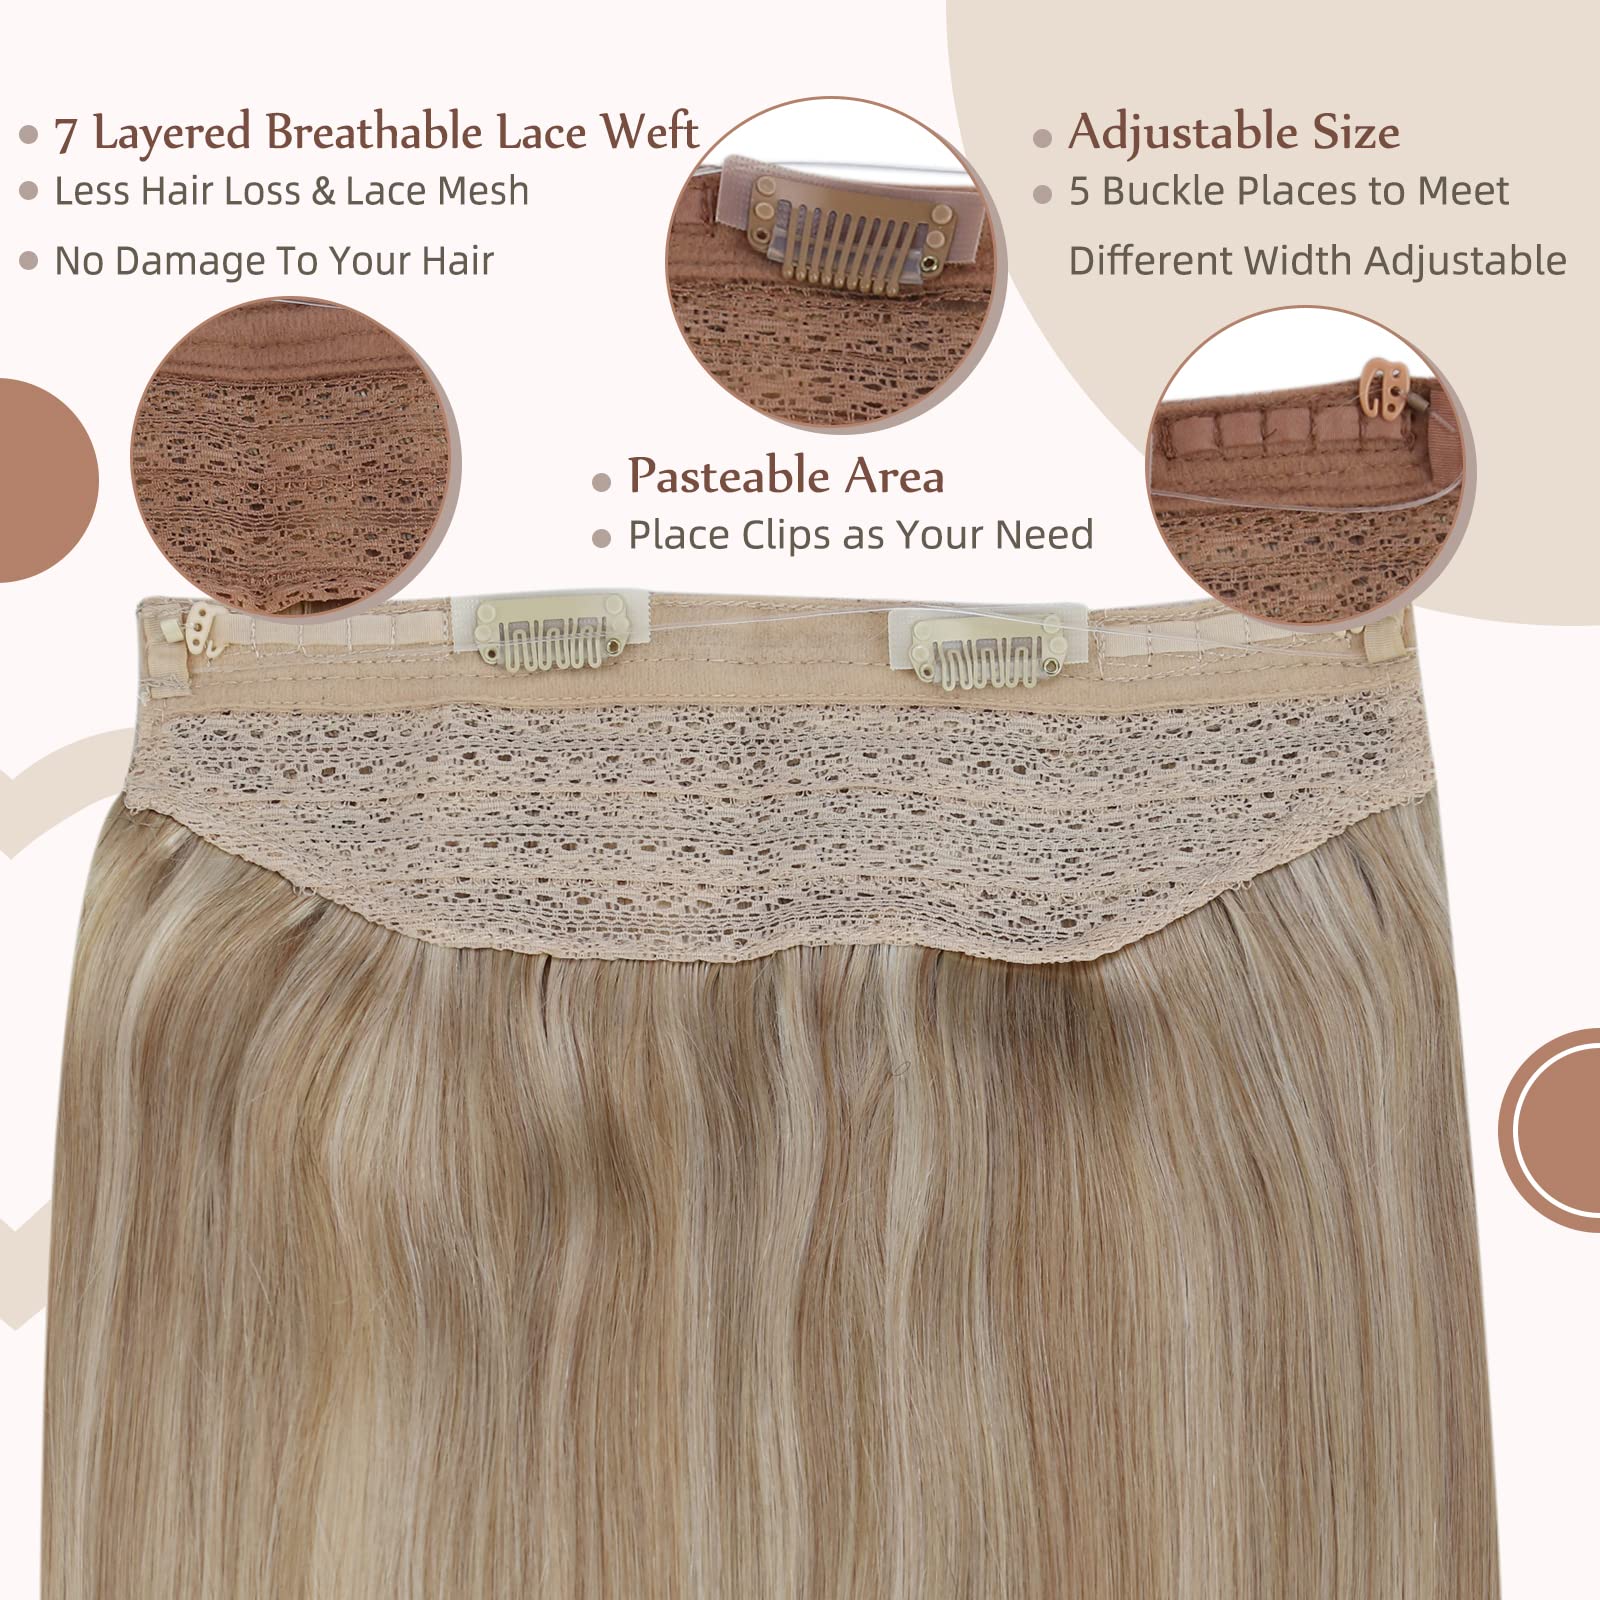 Fshine Invisible Wire Hair Extensions Secret Hairpieces Fish Wire Layered Hair Extensions Human Hair Ash Blonde 18 Highlight Blonde 613 Invisible Hair Extensions Removable Clips 80Gram 16 Inch